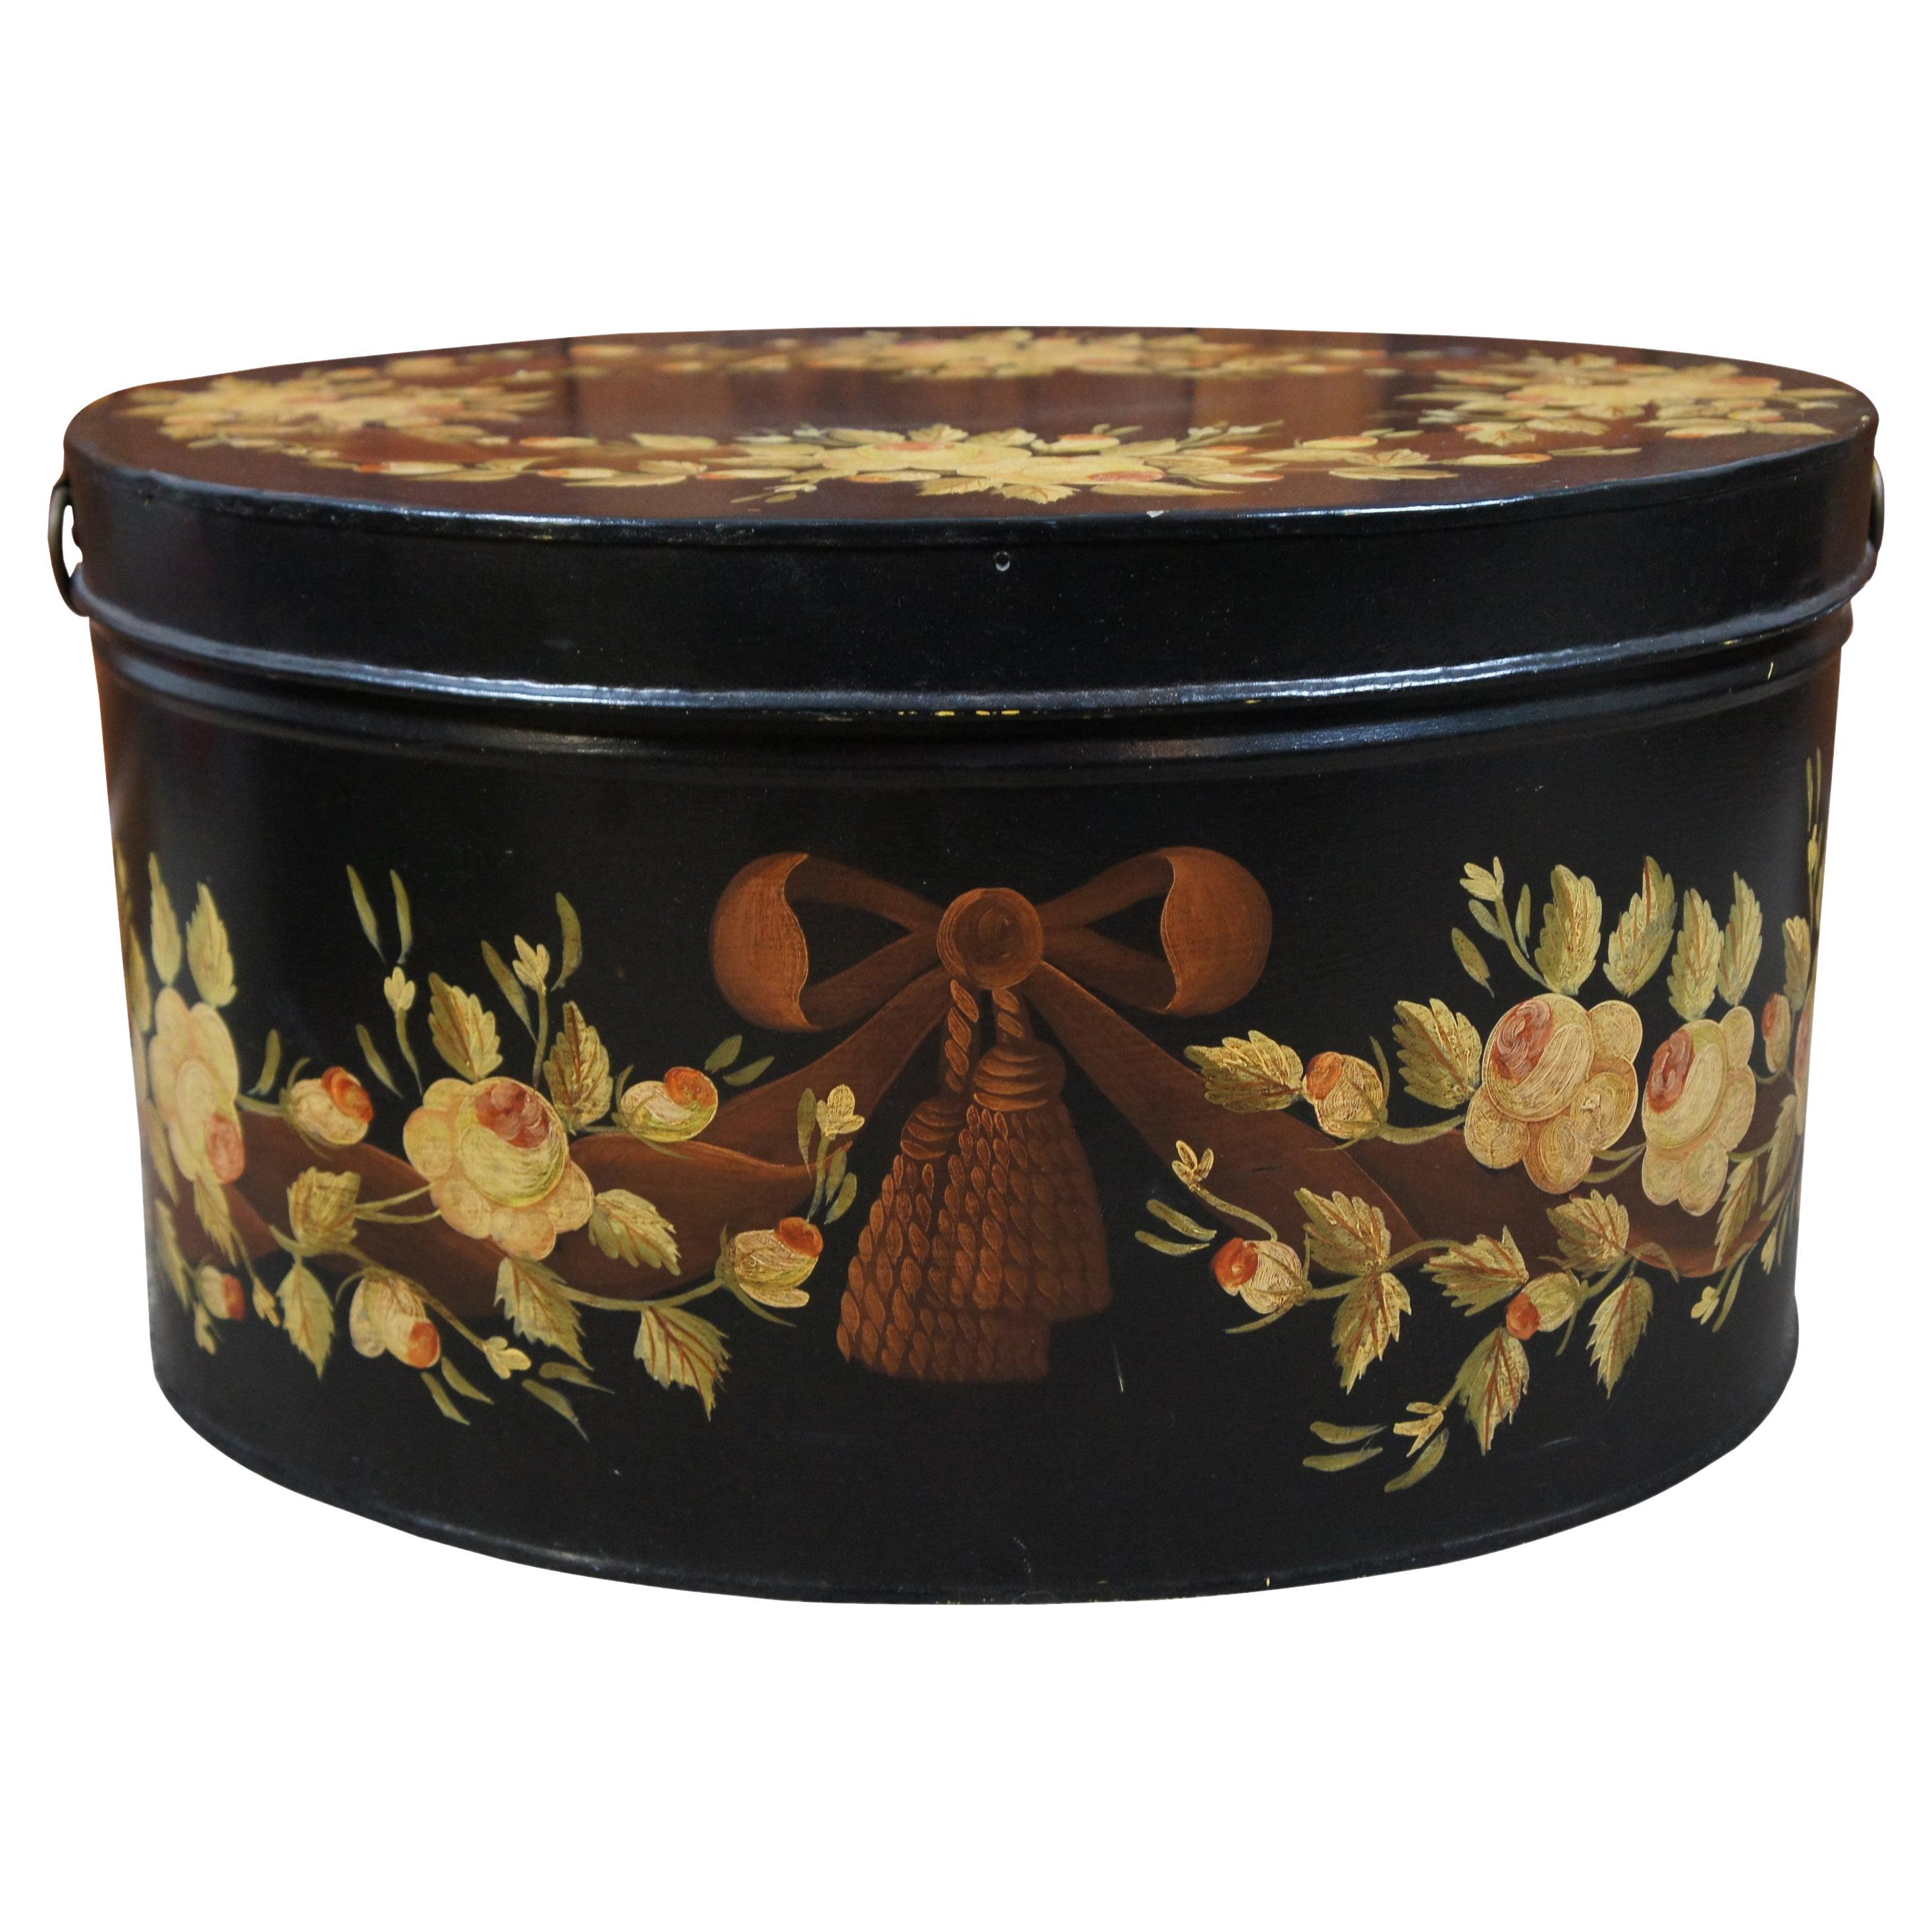 Large Antique Painted Oval Lidded Metal Toleware Box Bin Yellow Roses